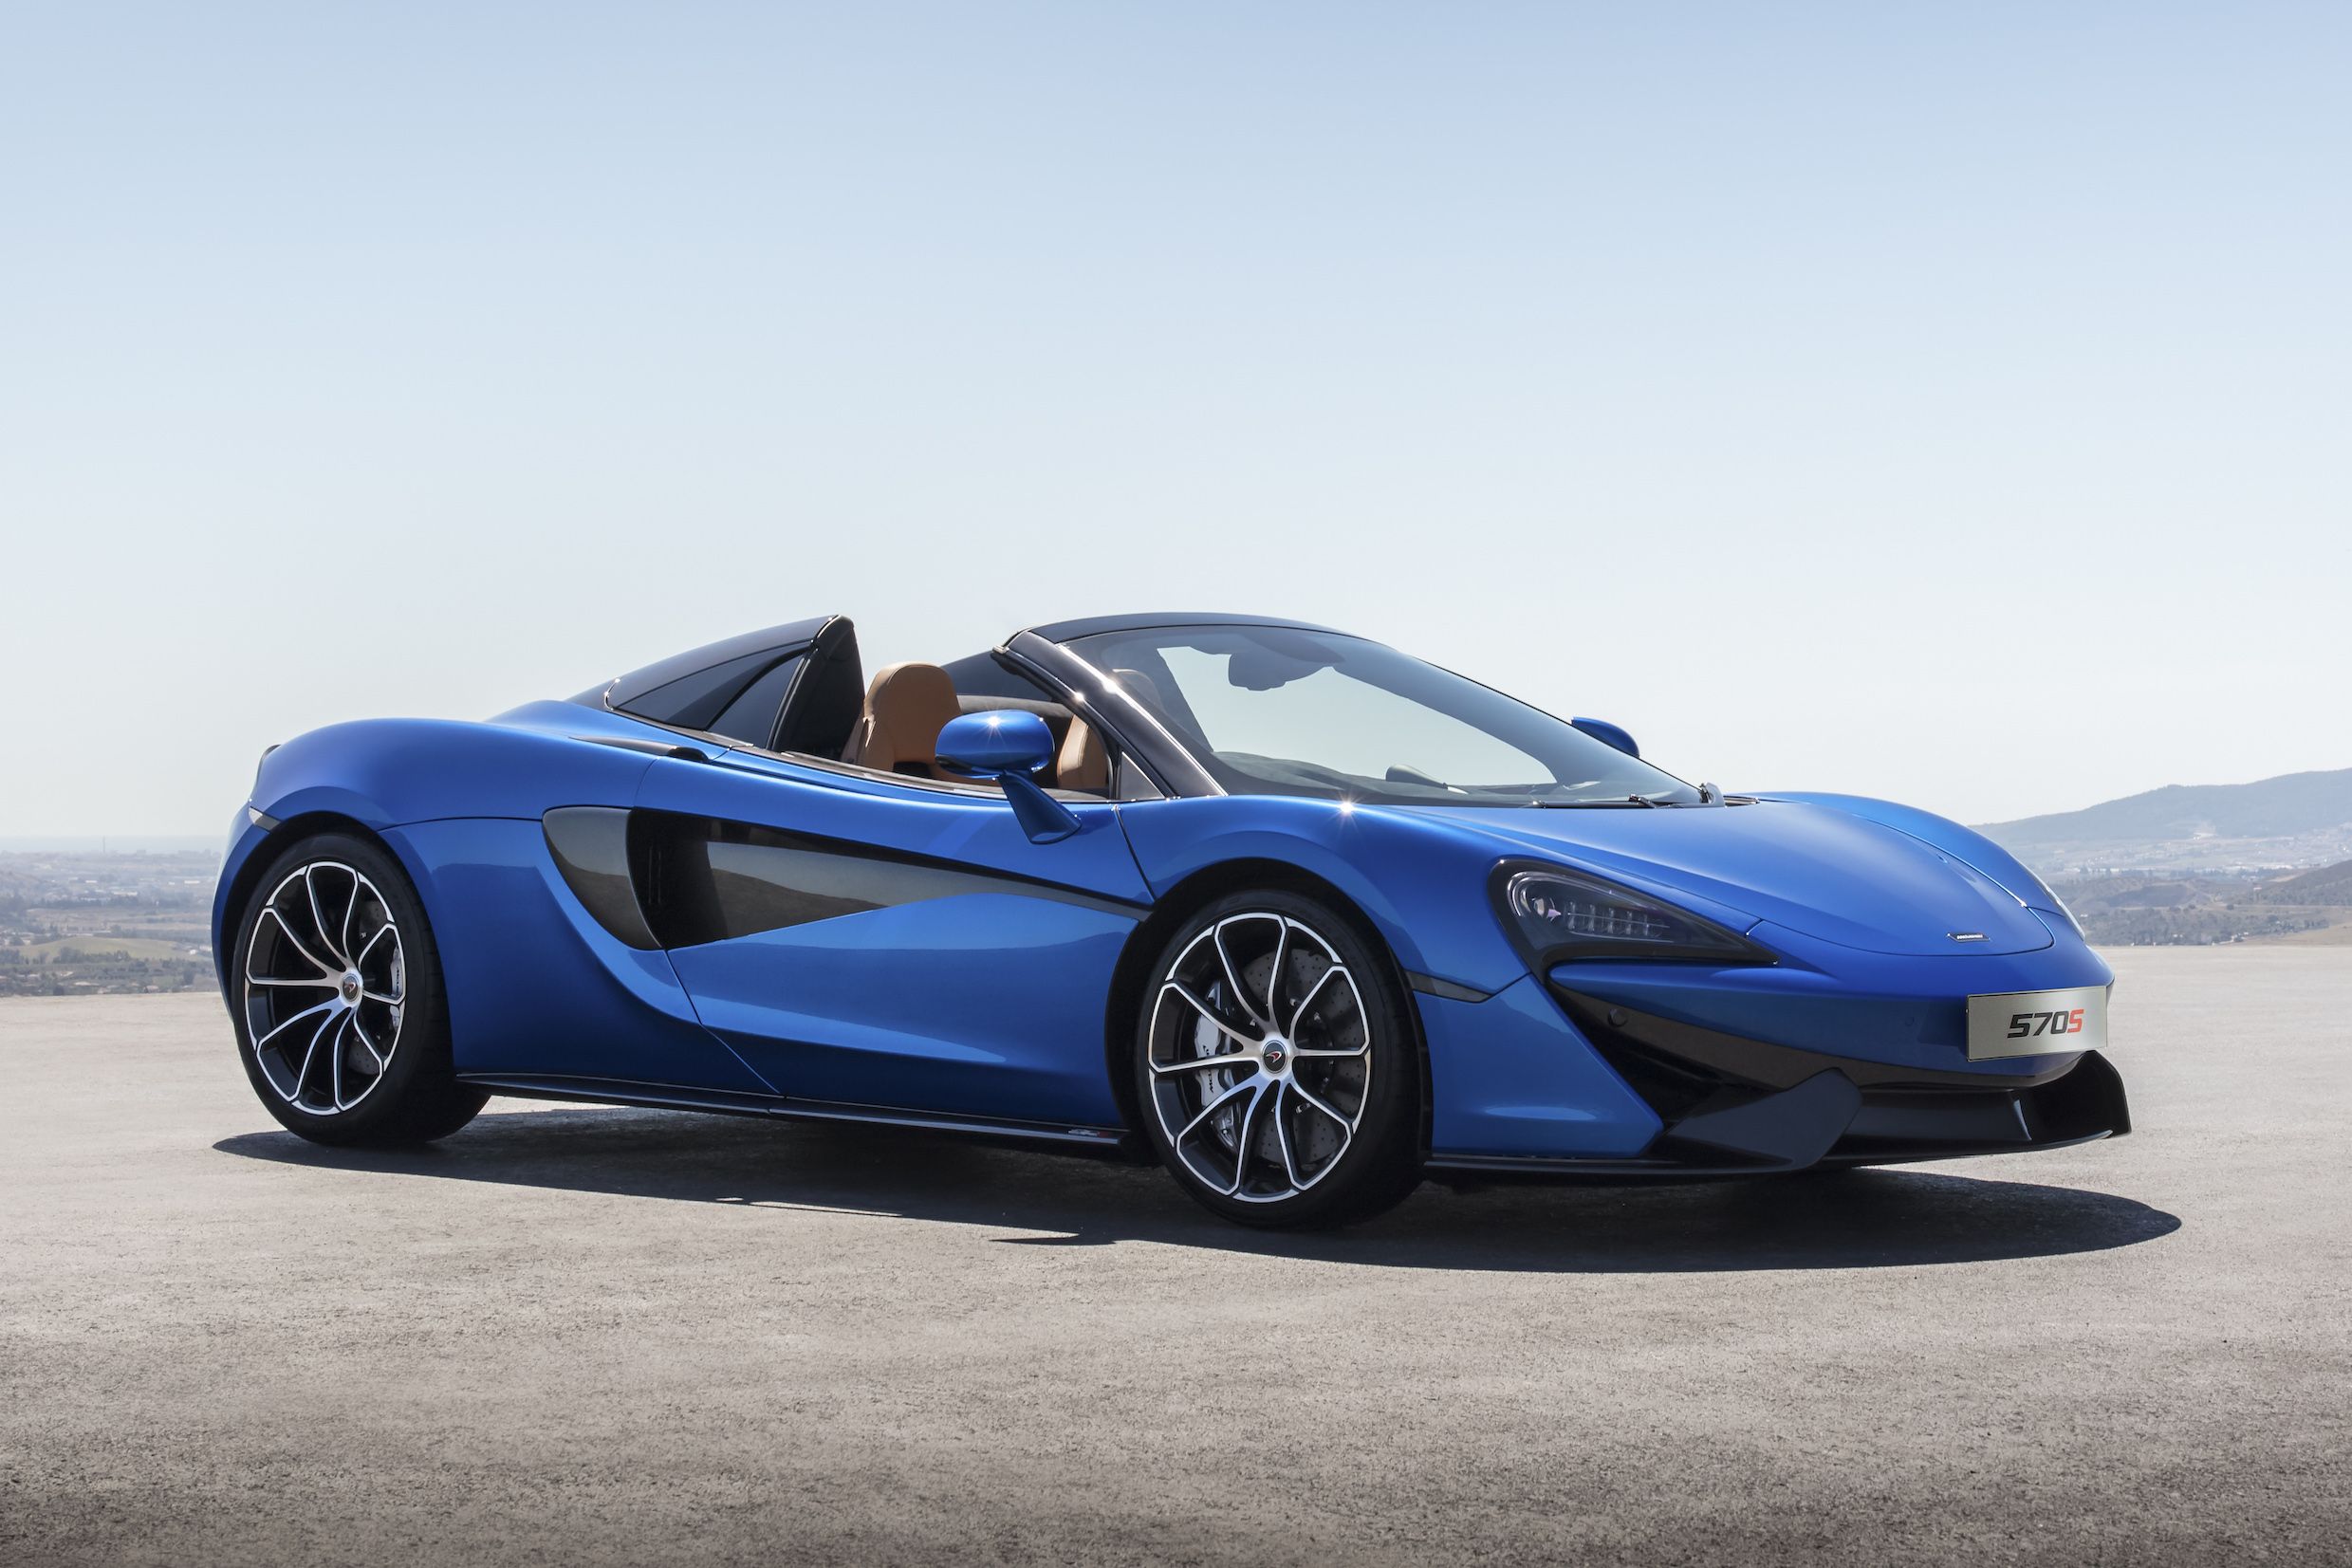 2018 McLaren 570S / 570GT Review, Pricing, and Specs